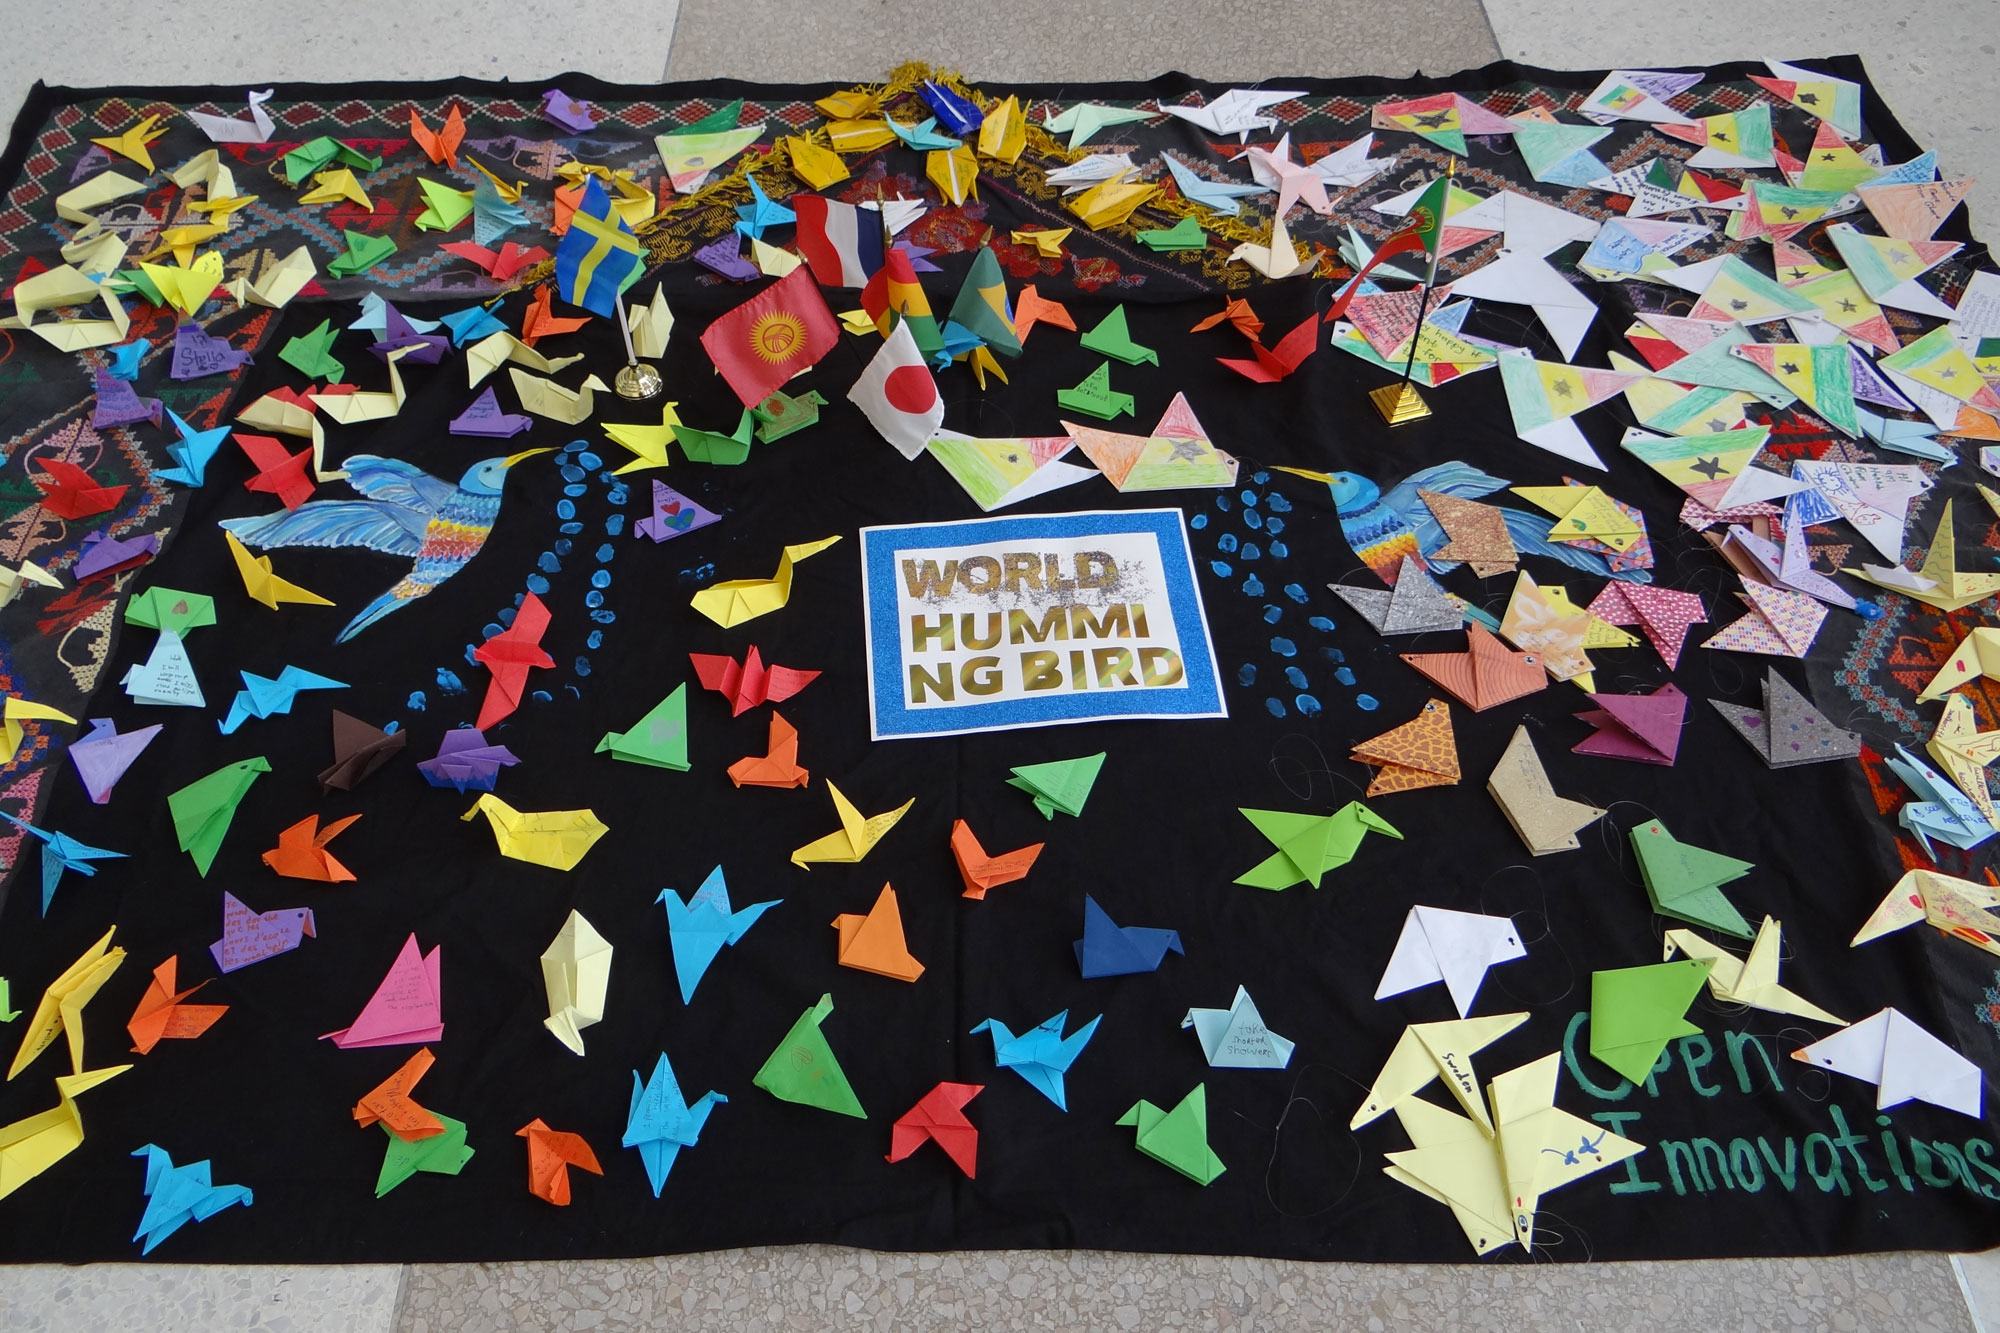 Origami hummingbirds crafted by children around the world are on display at UN Headquarters.